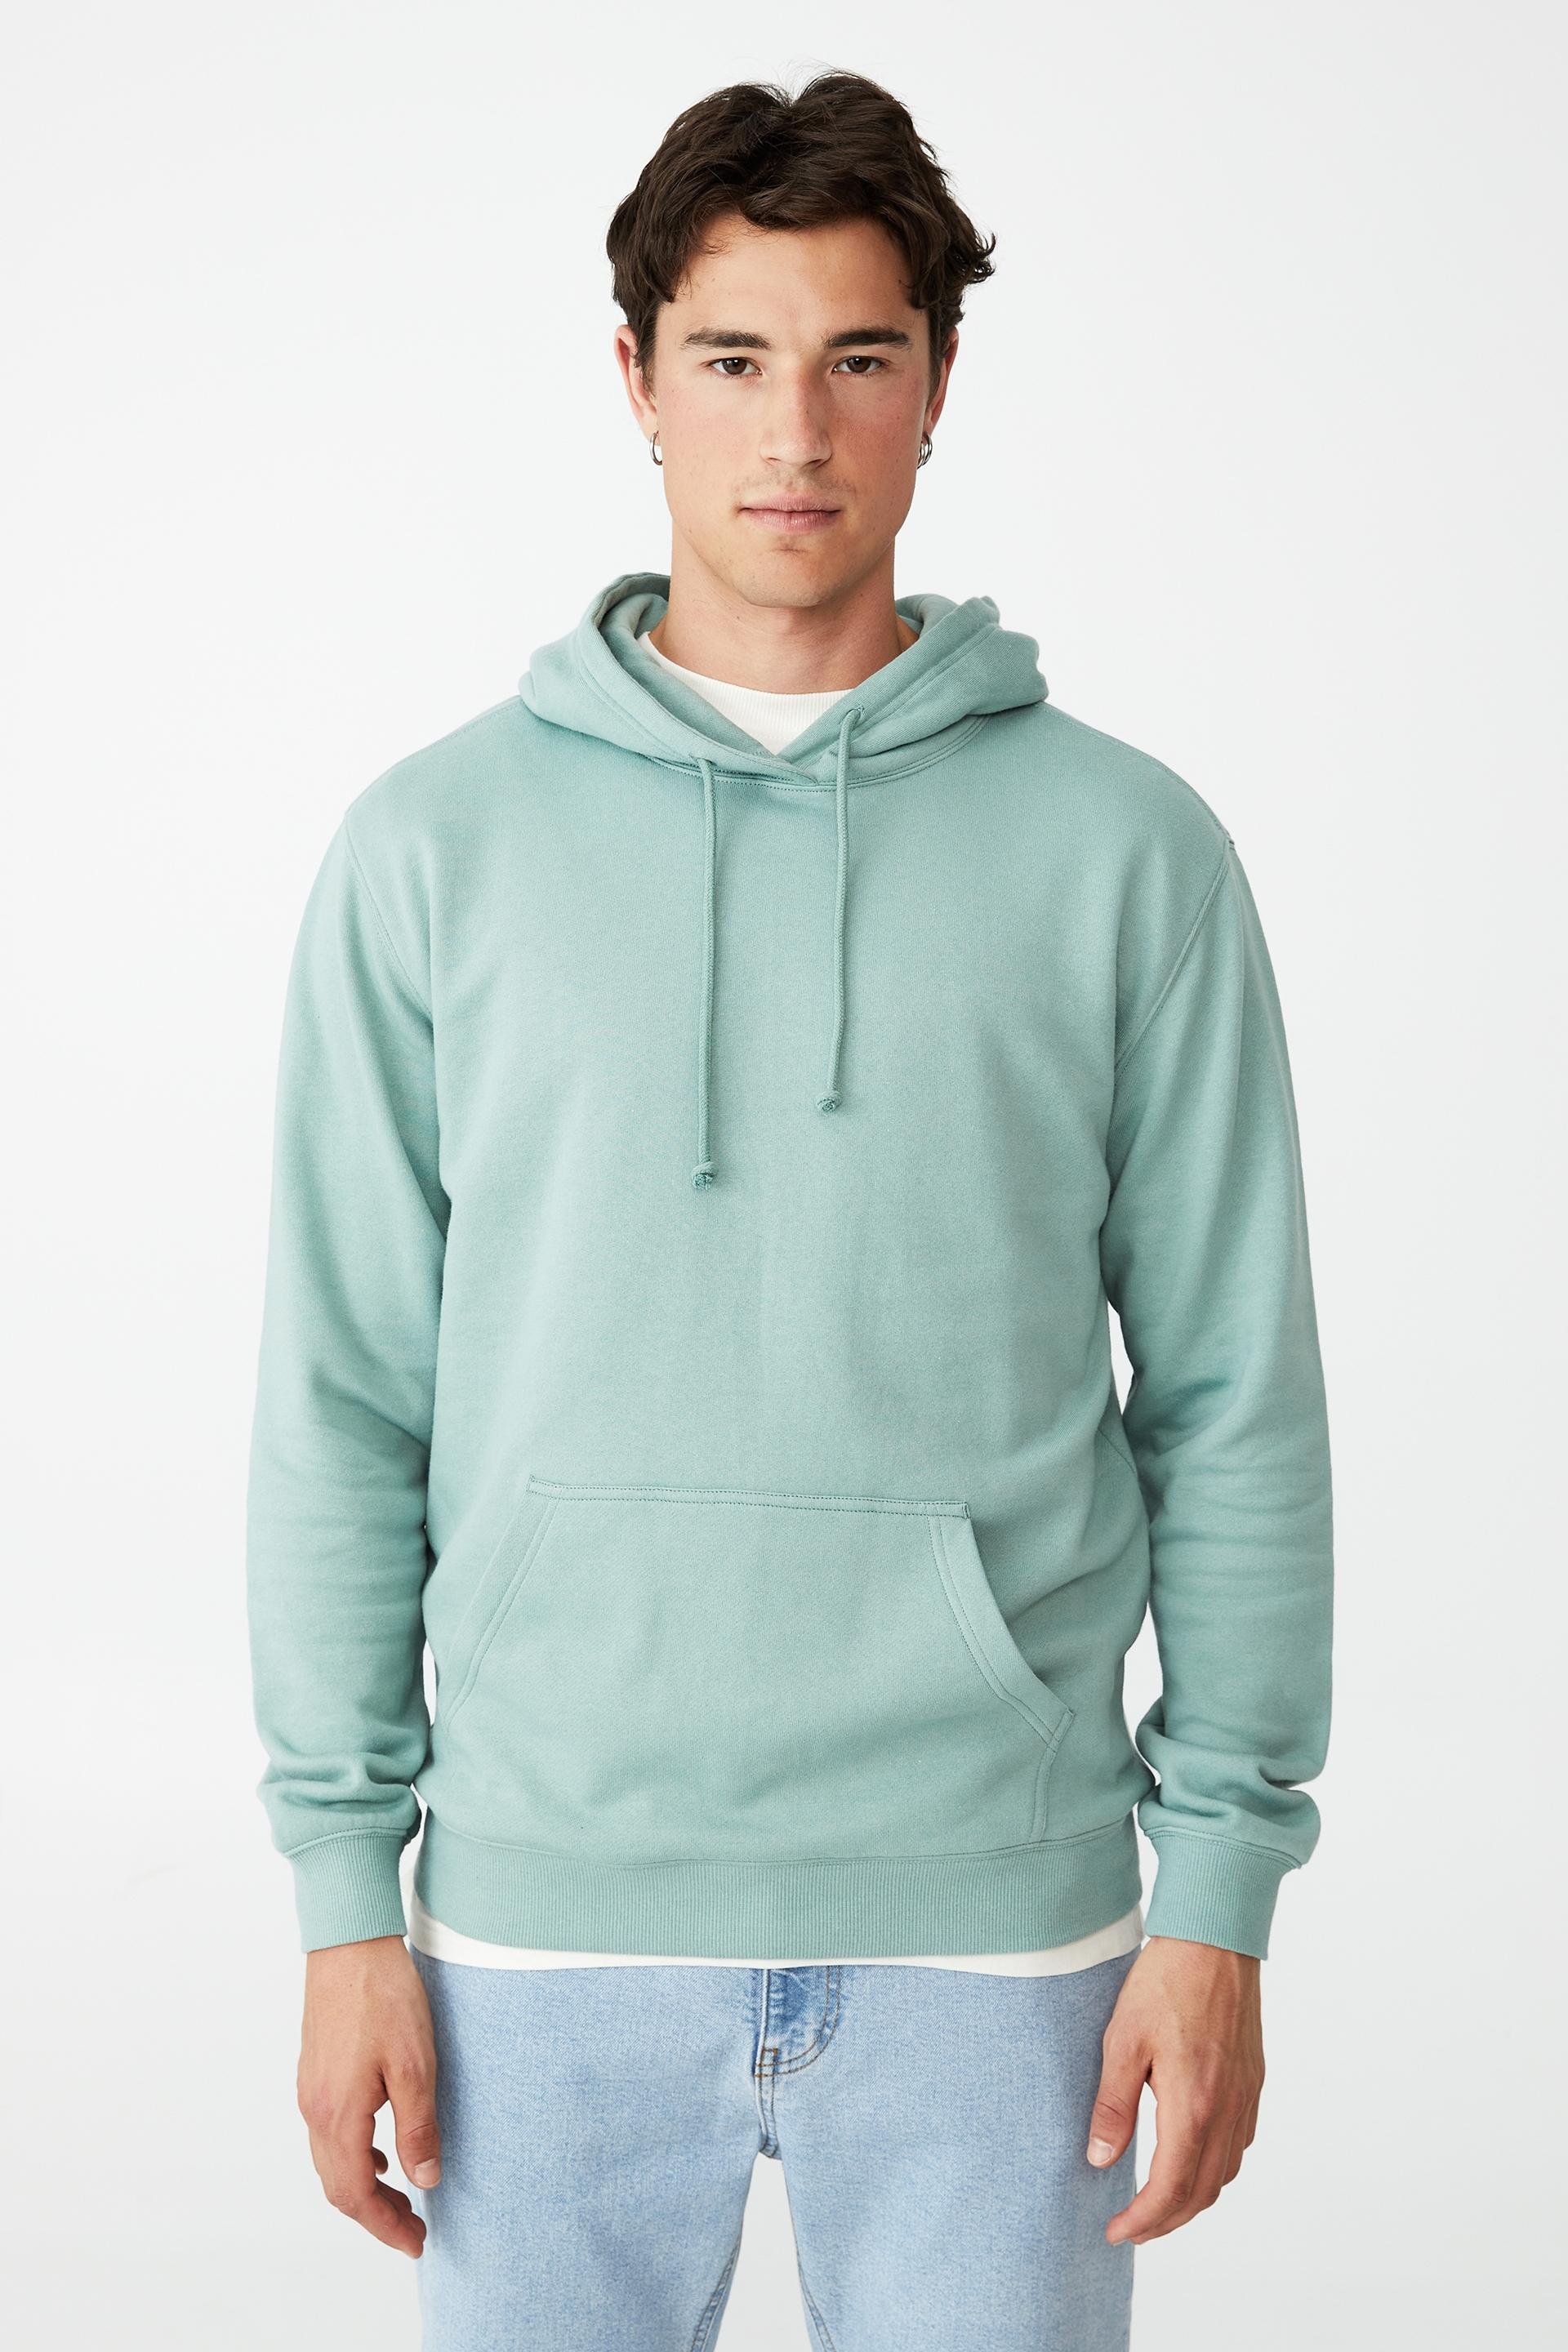 Essential fleece pullover - washed teal Cotton On Hoodies & Sweats ...